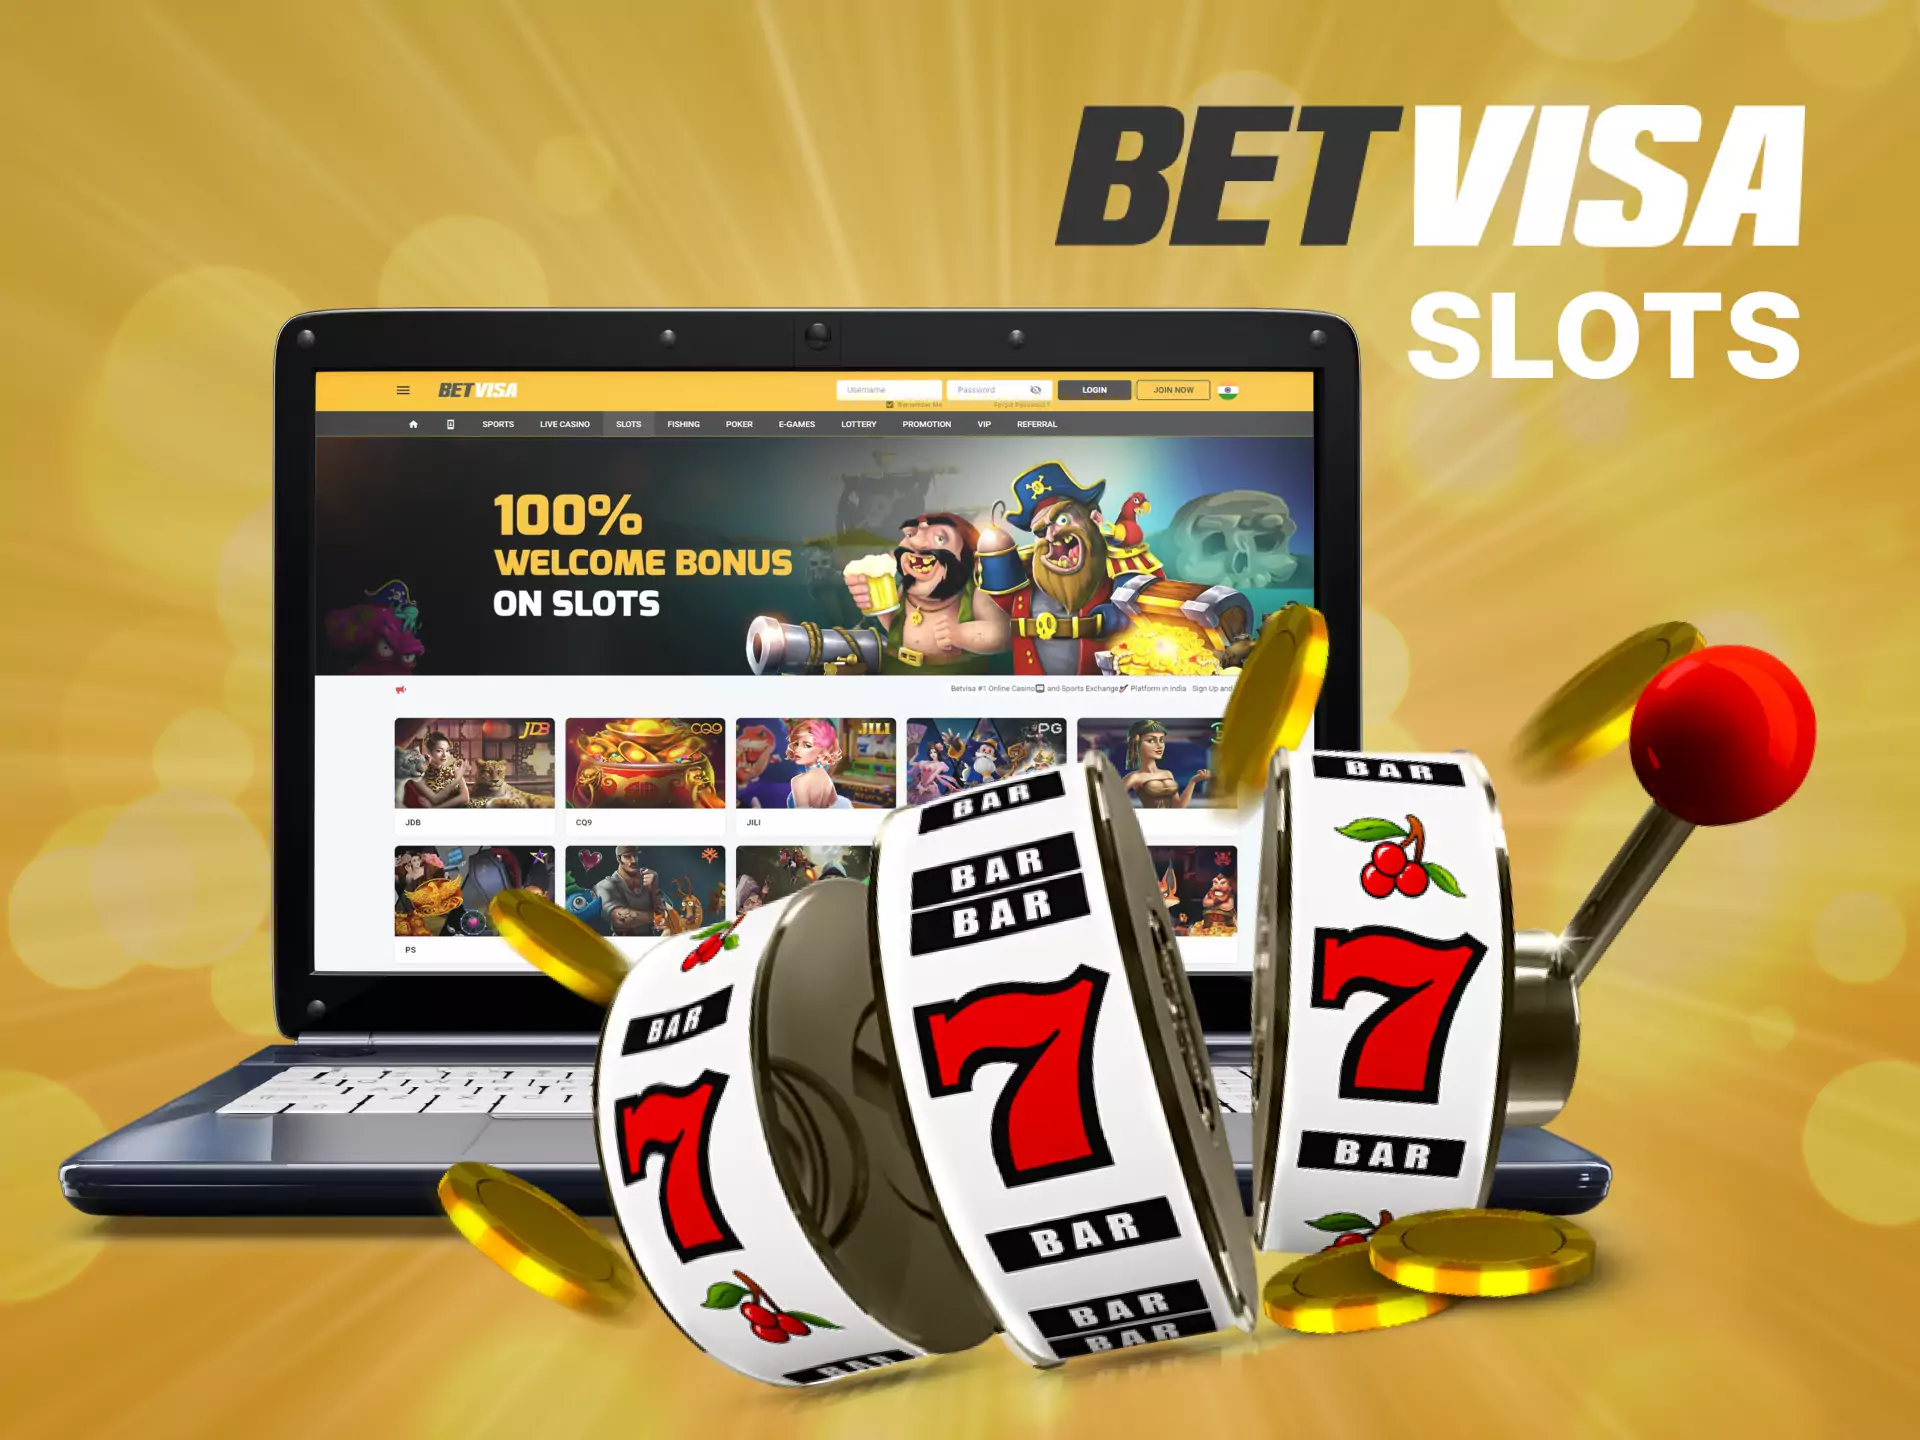 Visit the Betvisa Online Casino and play colourful slots.